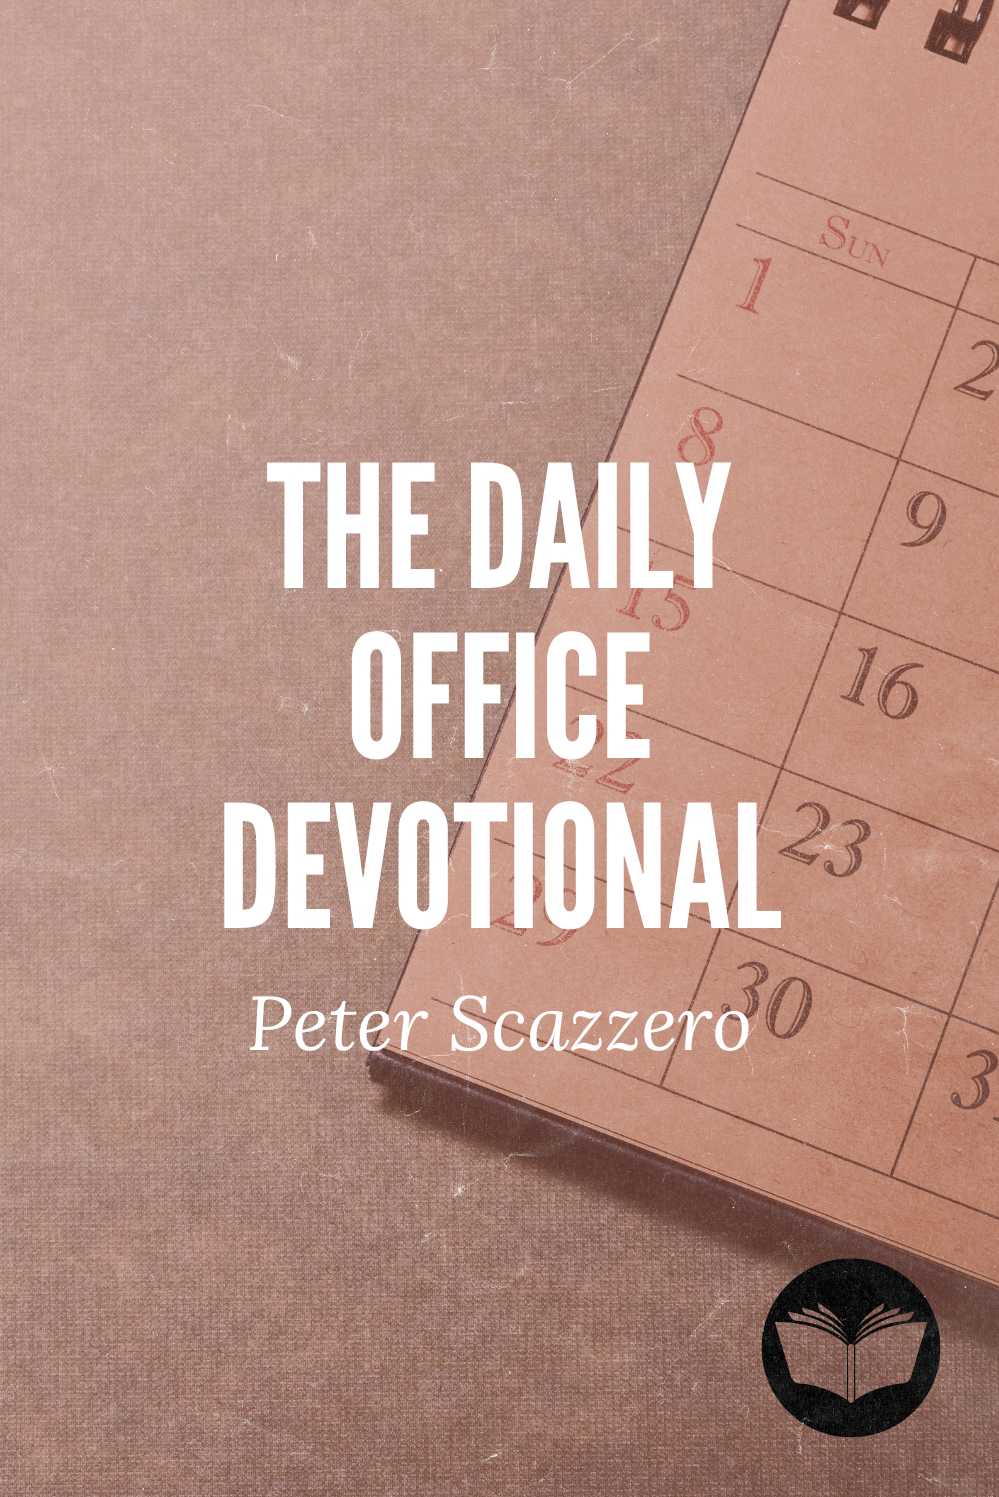 The Daily Office Devotional